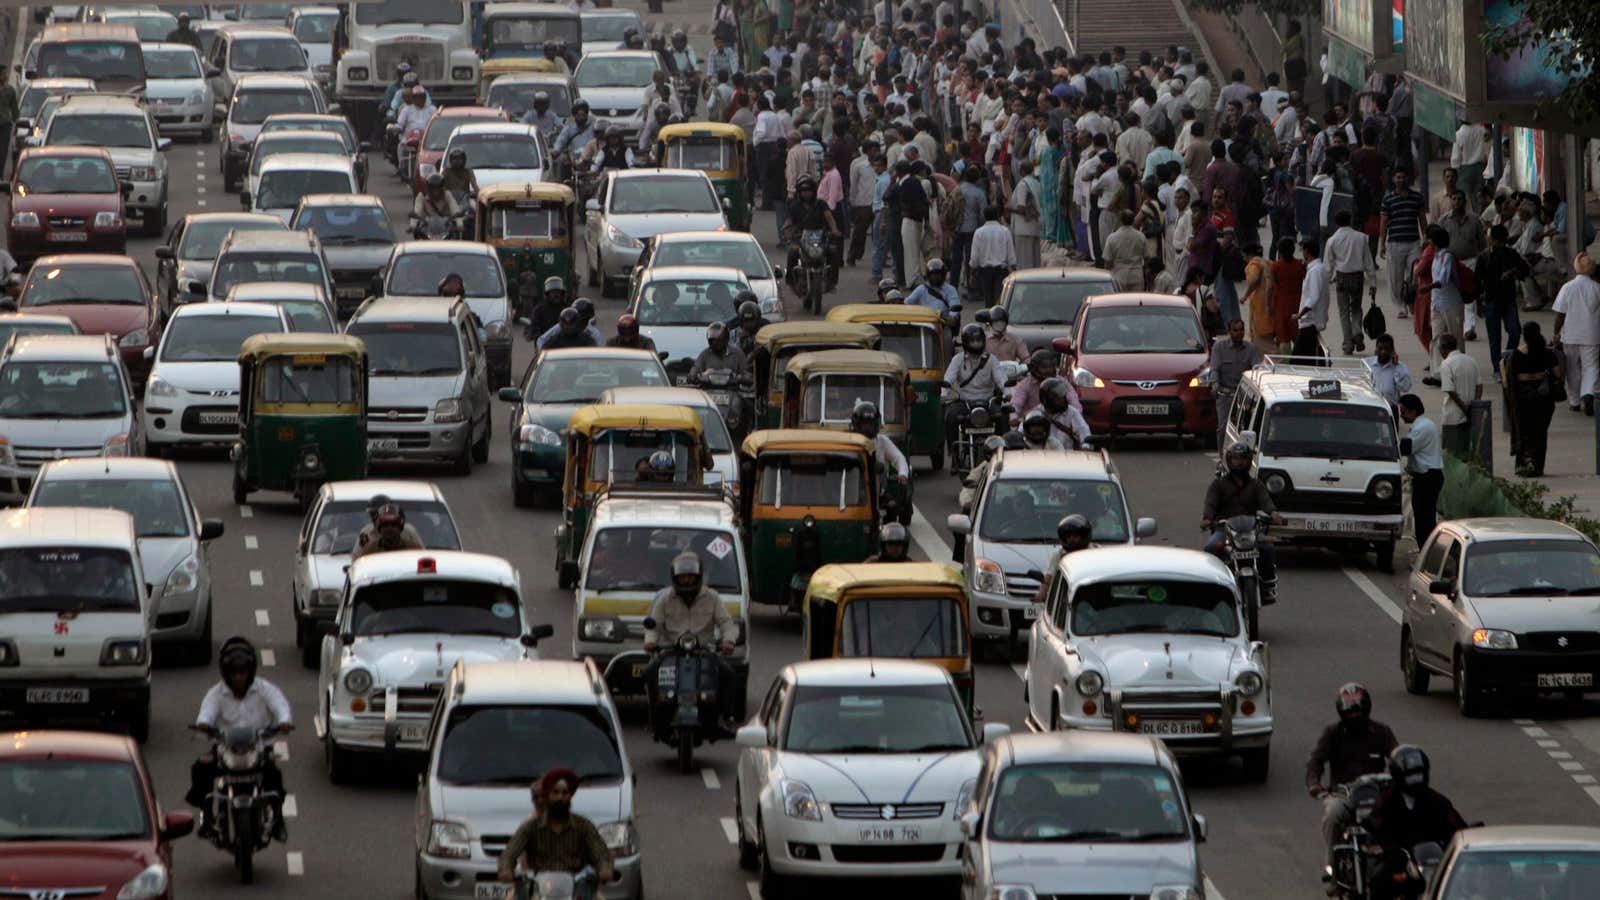 Trucks are the deadliest vehicles on India’s roads, but cars are catching up.